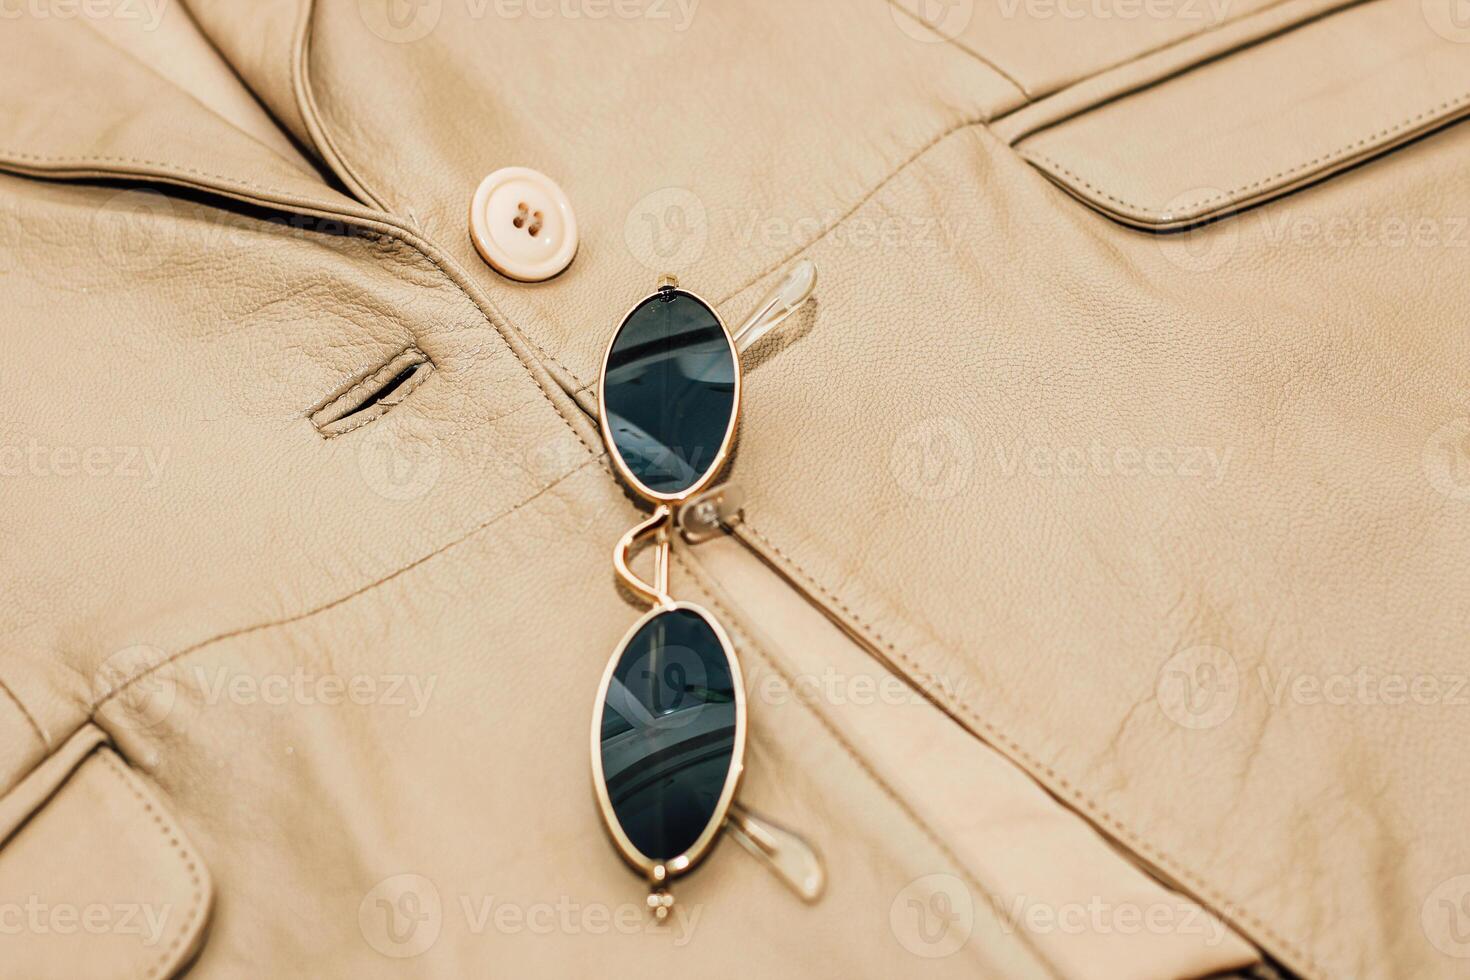 Gold-rimmed sunglasses on the texture of a brown leather jacket, genuine soft leather photo